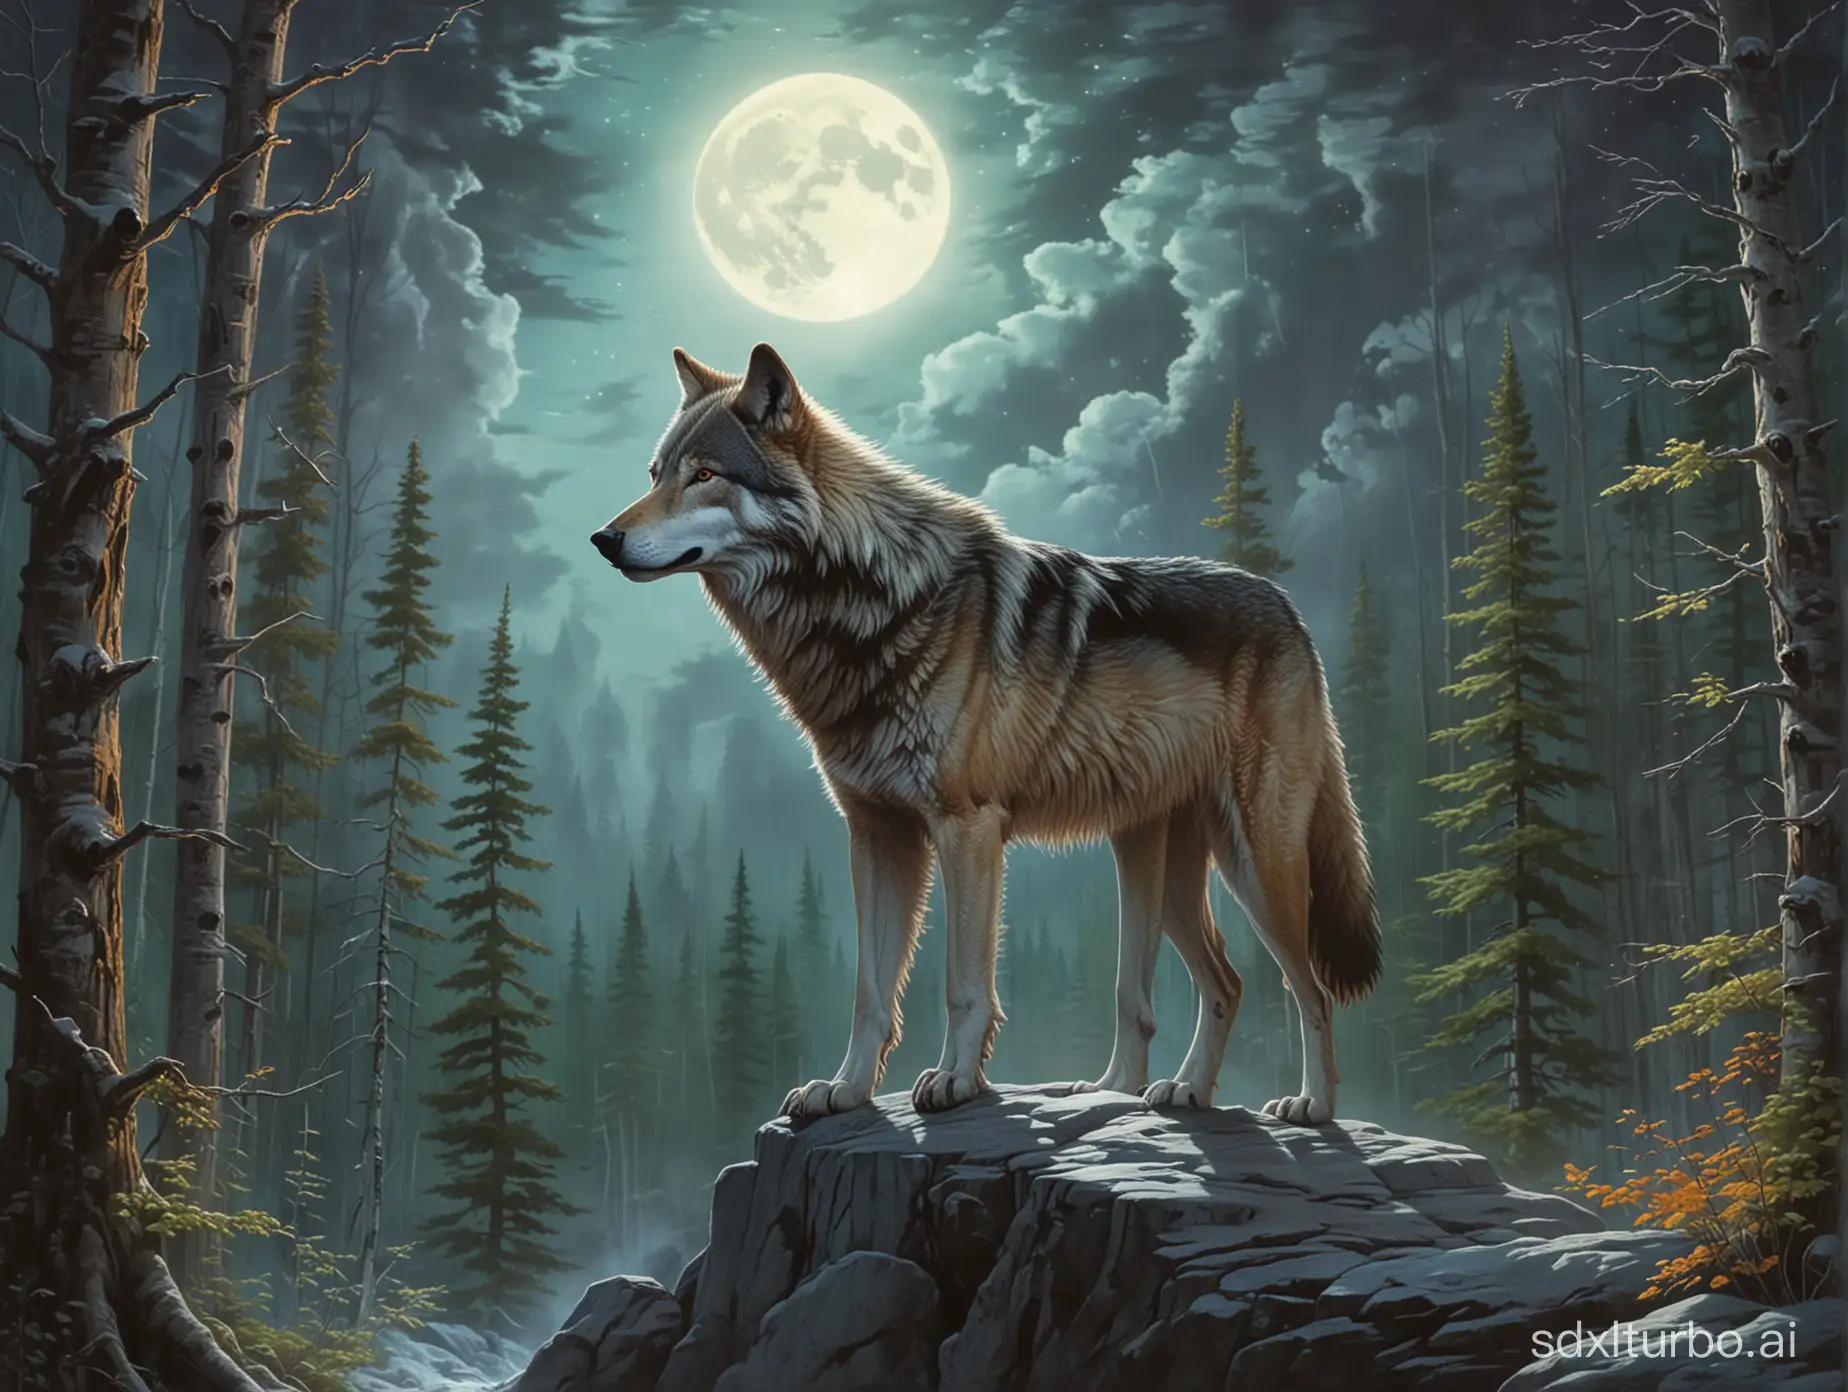 a wolf in a clift with a forest background and full moon. the wolf is looking down the clift. the wolf have aurora boreal colors